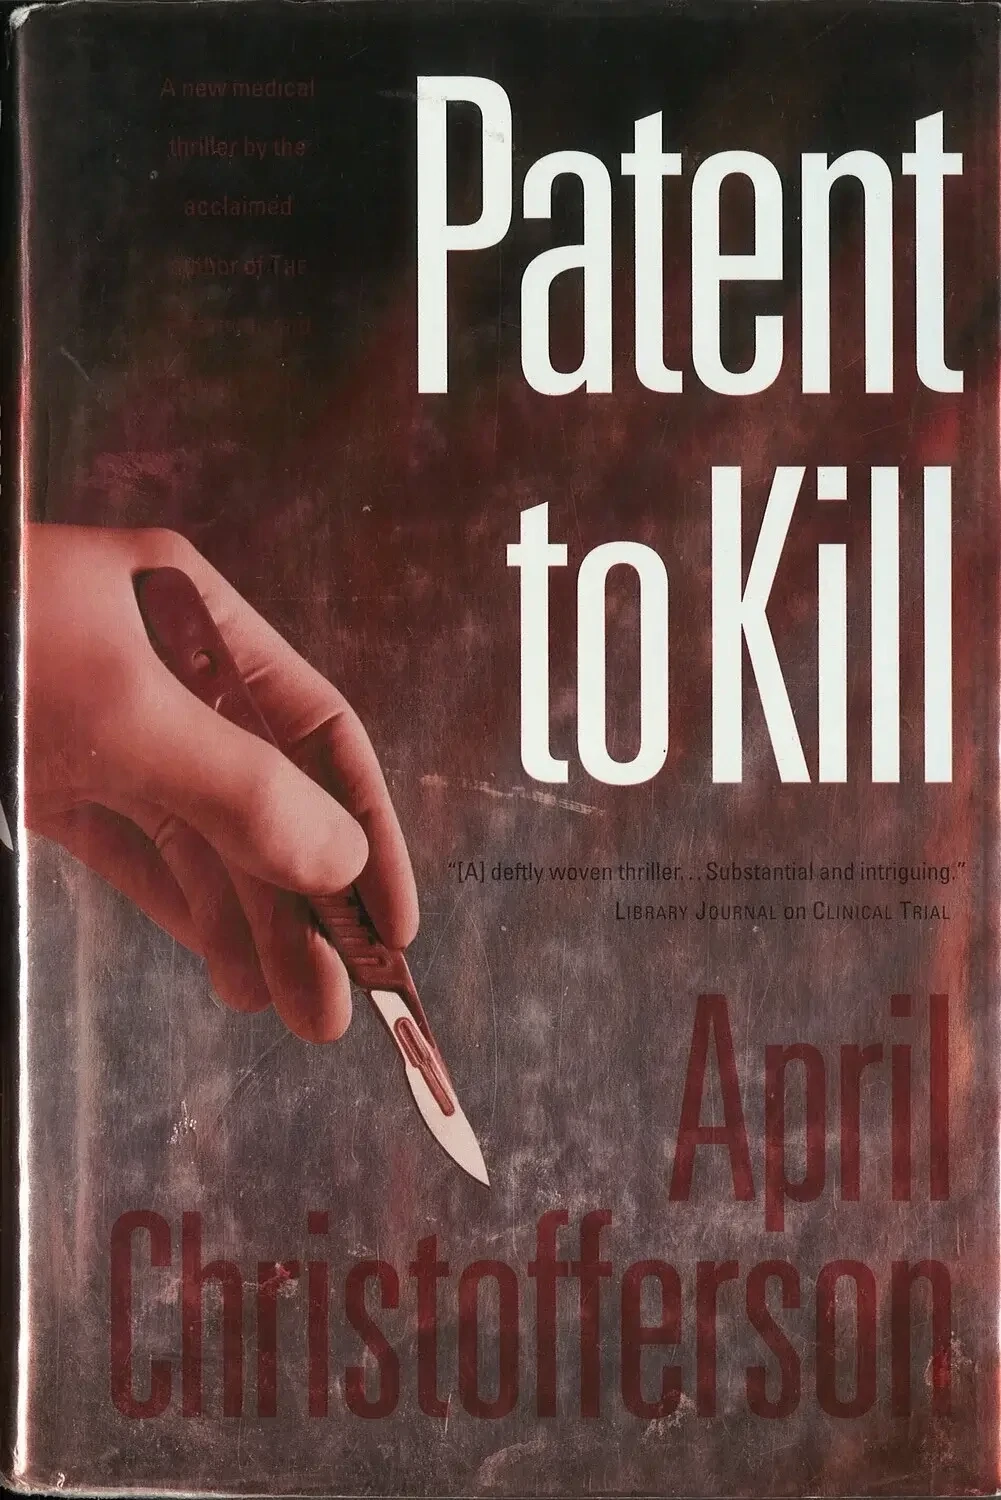 Patent to Kill by April Christofferson